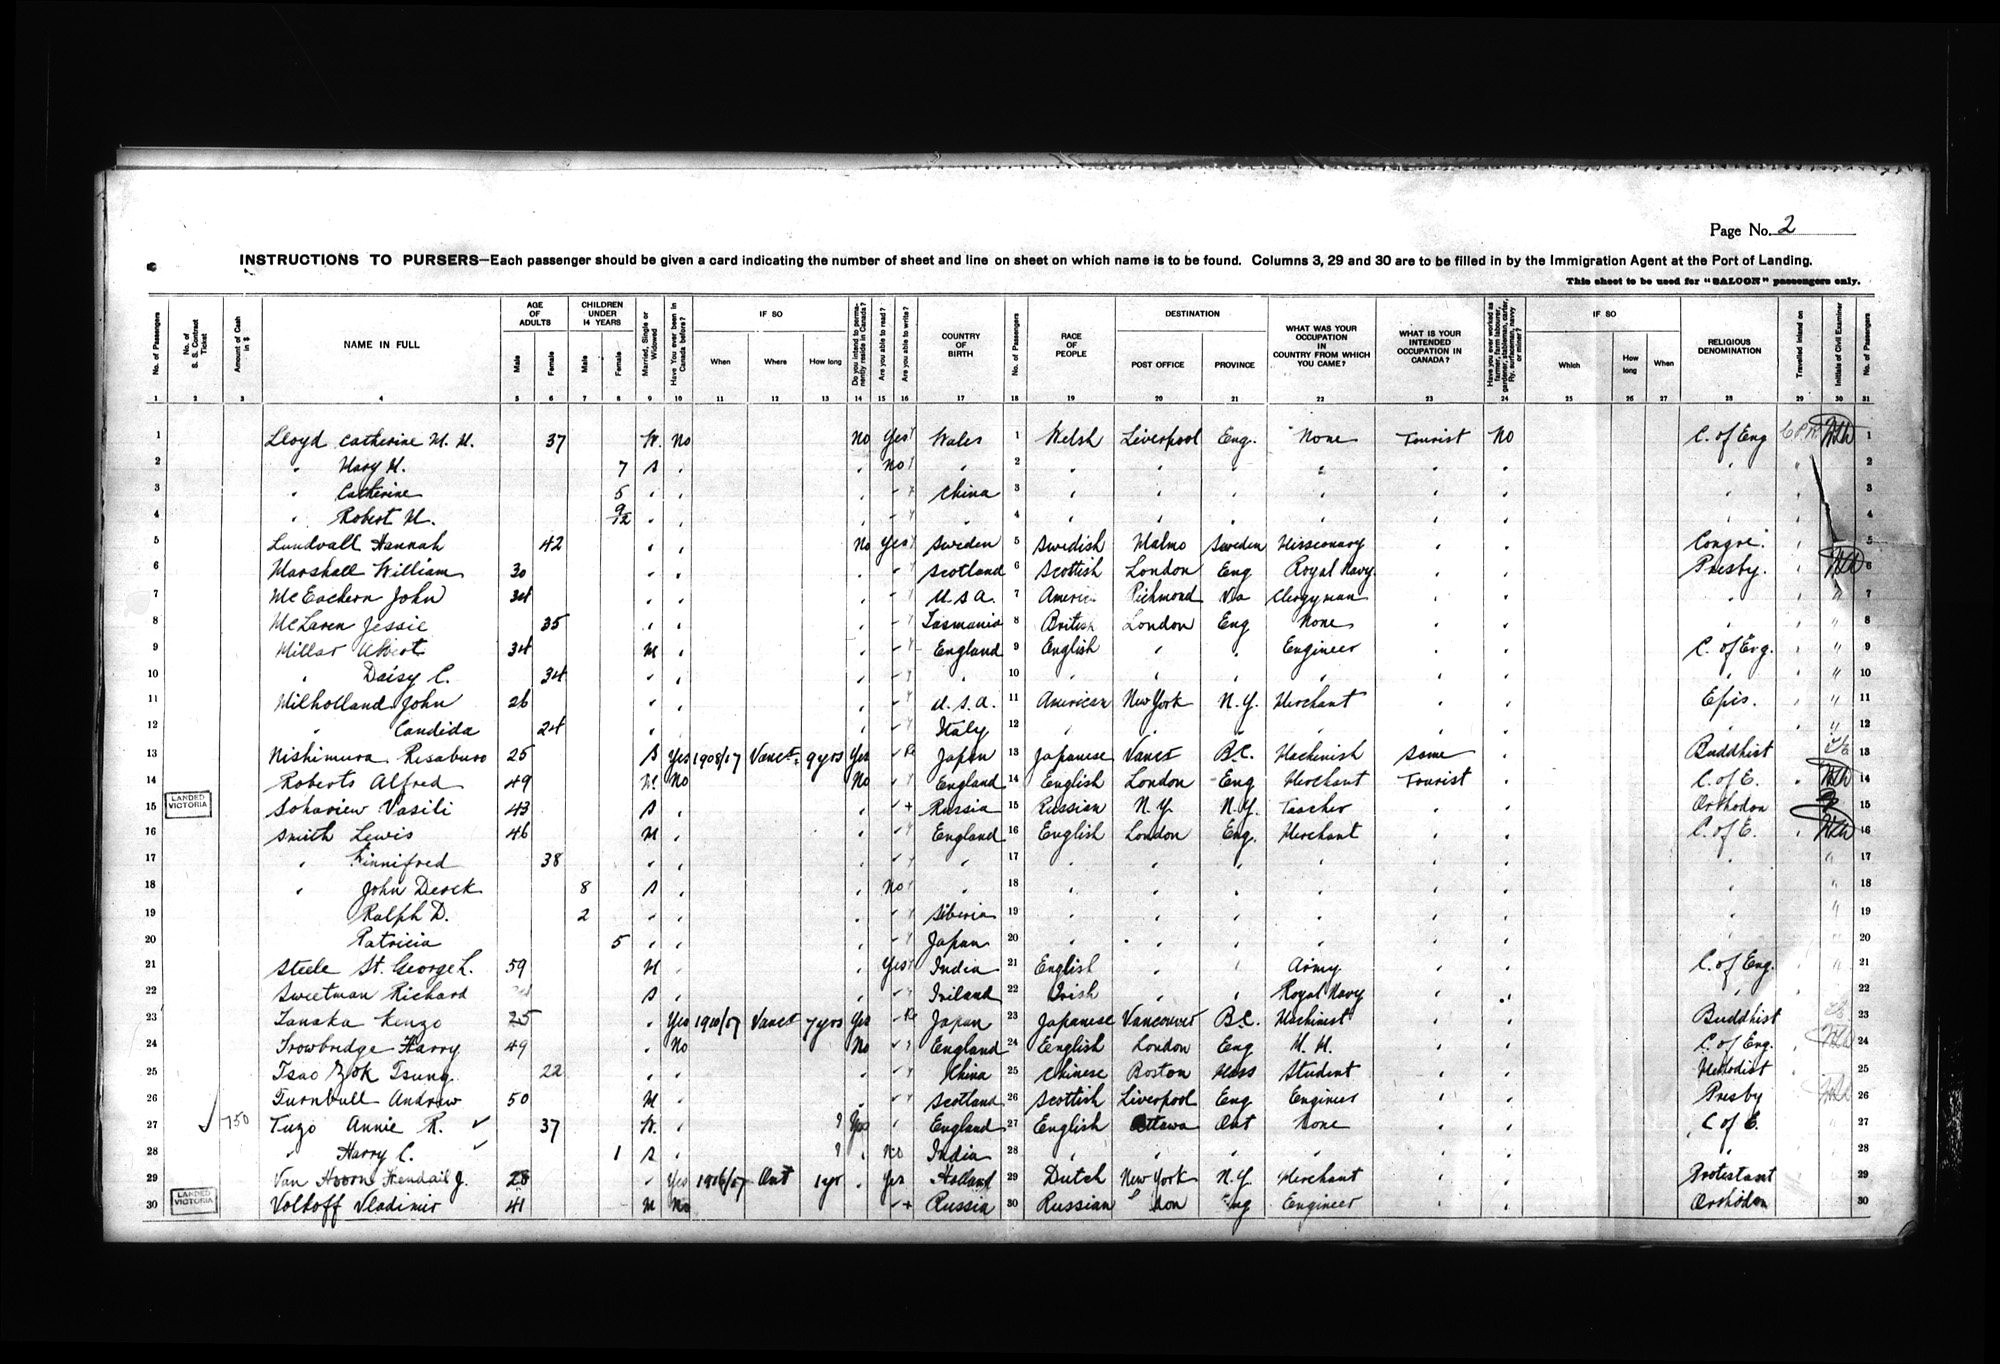 Digitized page of Passenger Lists for Image No.: CANIMM1913PLIST_0000408296-00251